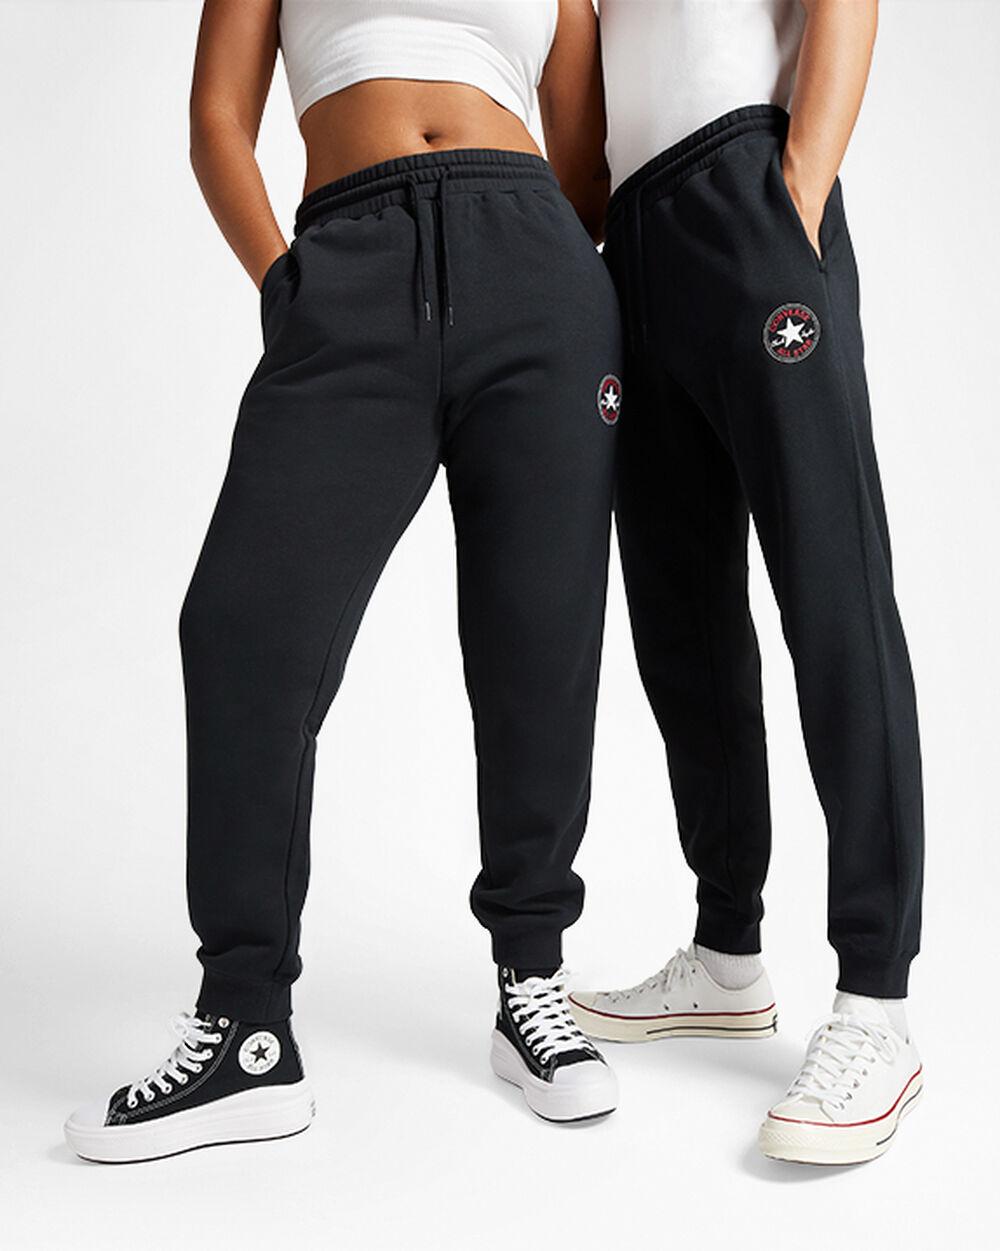 Converse Go-to All Star Patch Standard-fit Lyst Men in UK Fleece for Black Sweatpants 